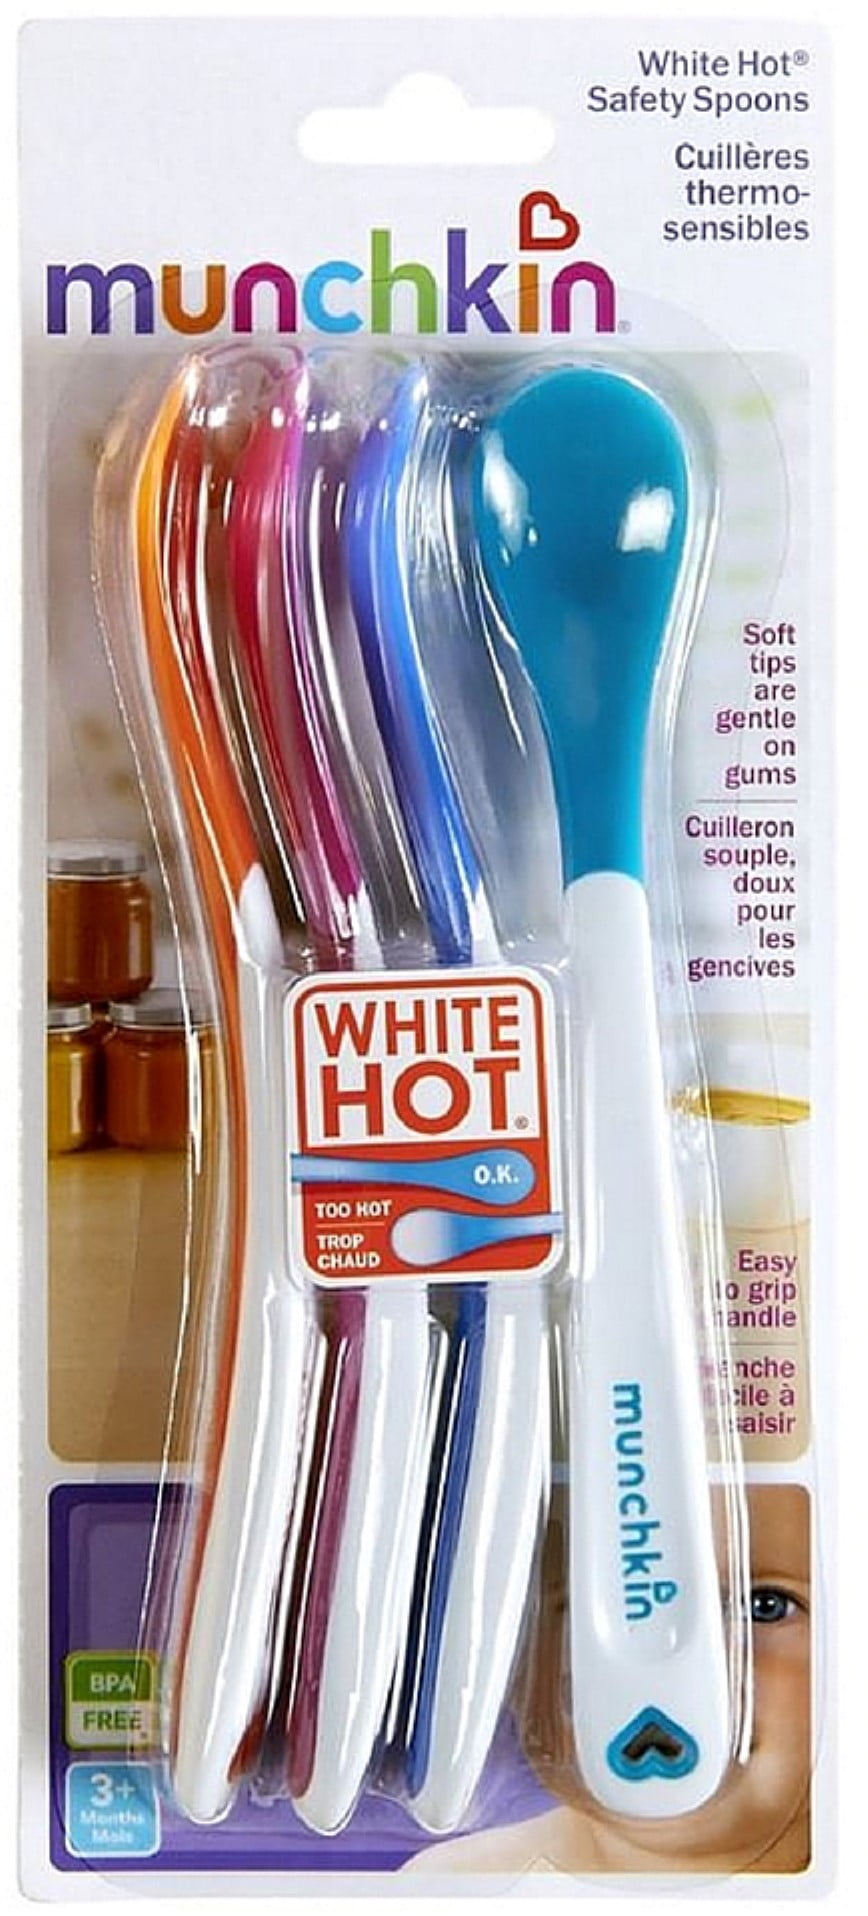 Munchkin White Hot Safety Spoons, Assorted Colors 4 Each - (Pack of 4) 